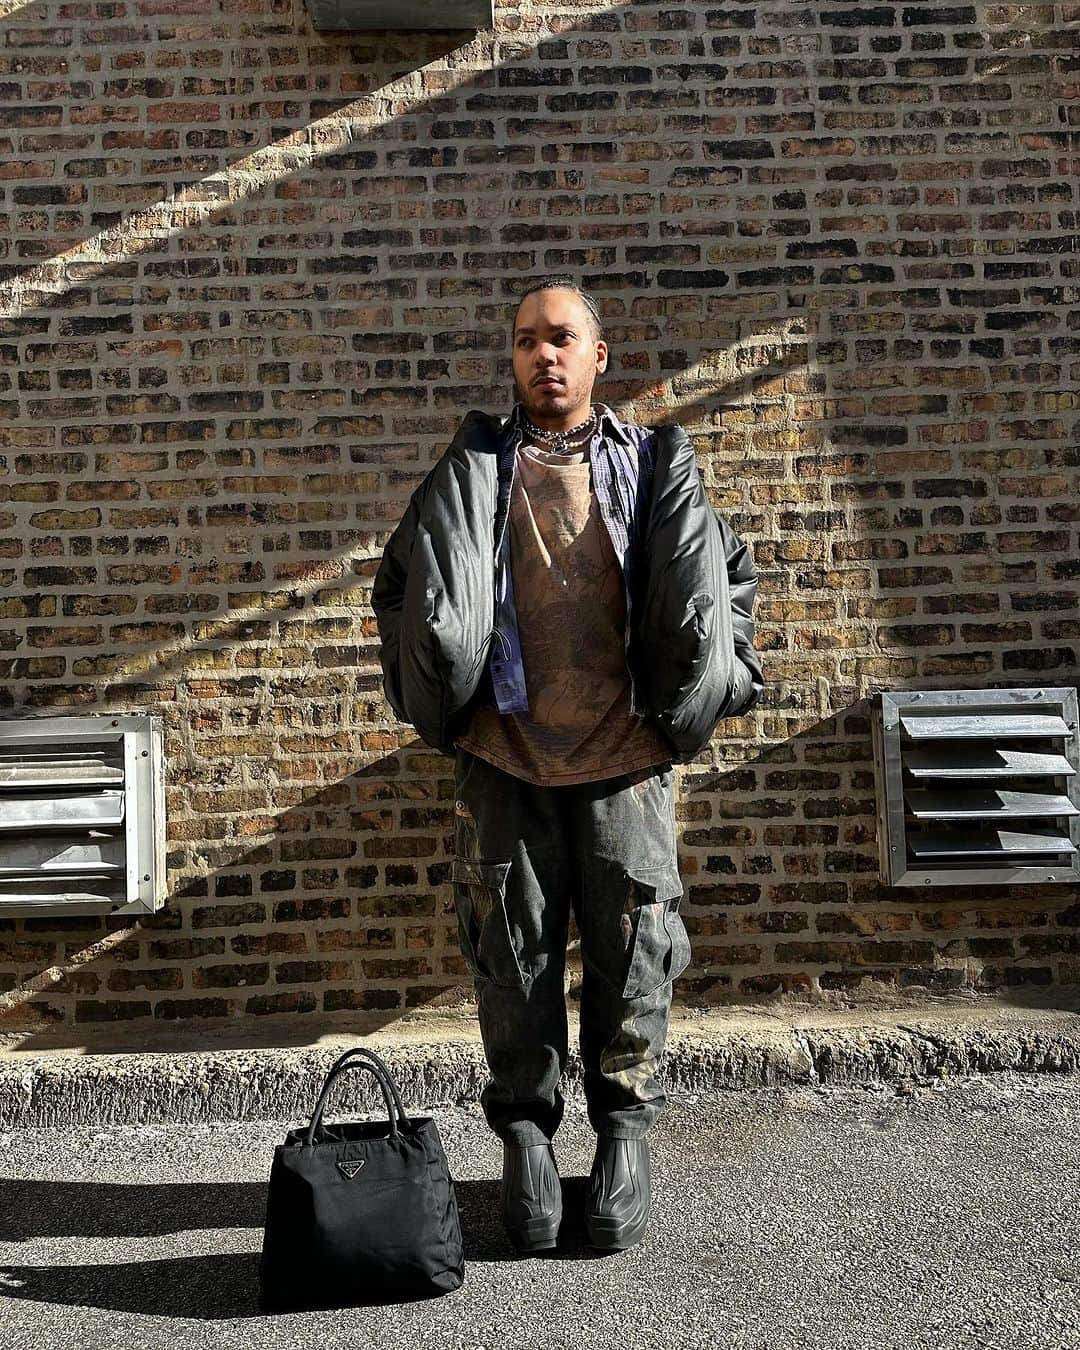 2nd STREET USAのインスタグラム：「ITEMS AVAILABLE AT  2nd Street Lincoln Park 📍Jacket- Yeezy/Gap $129 size Xl Top- Yeezy Season 4 $ 109 size XL  Shirt - Needles $159 Size M Bottom-  Mossy Oak $ 29 Size 33 Shoes - 1017 Alyx $199 Size 9  Bag-  Prada Tote Bag $ 299」